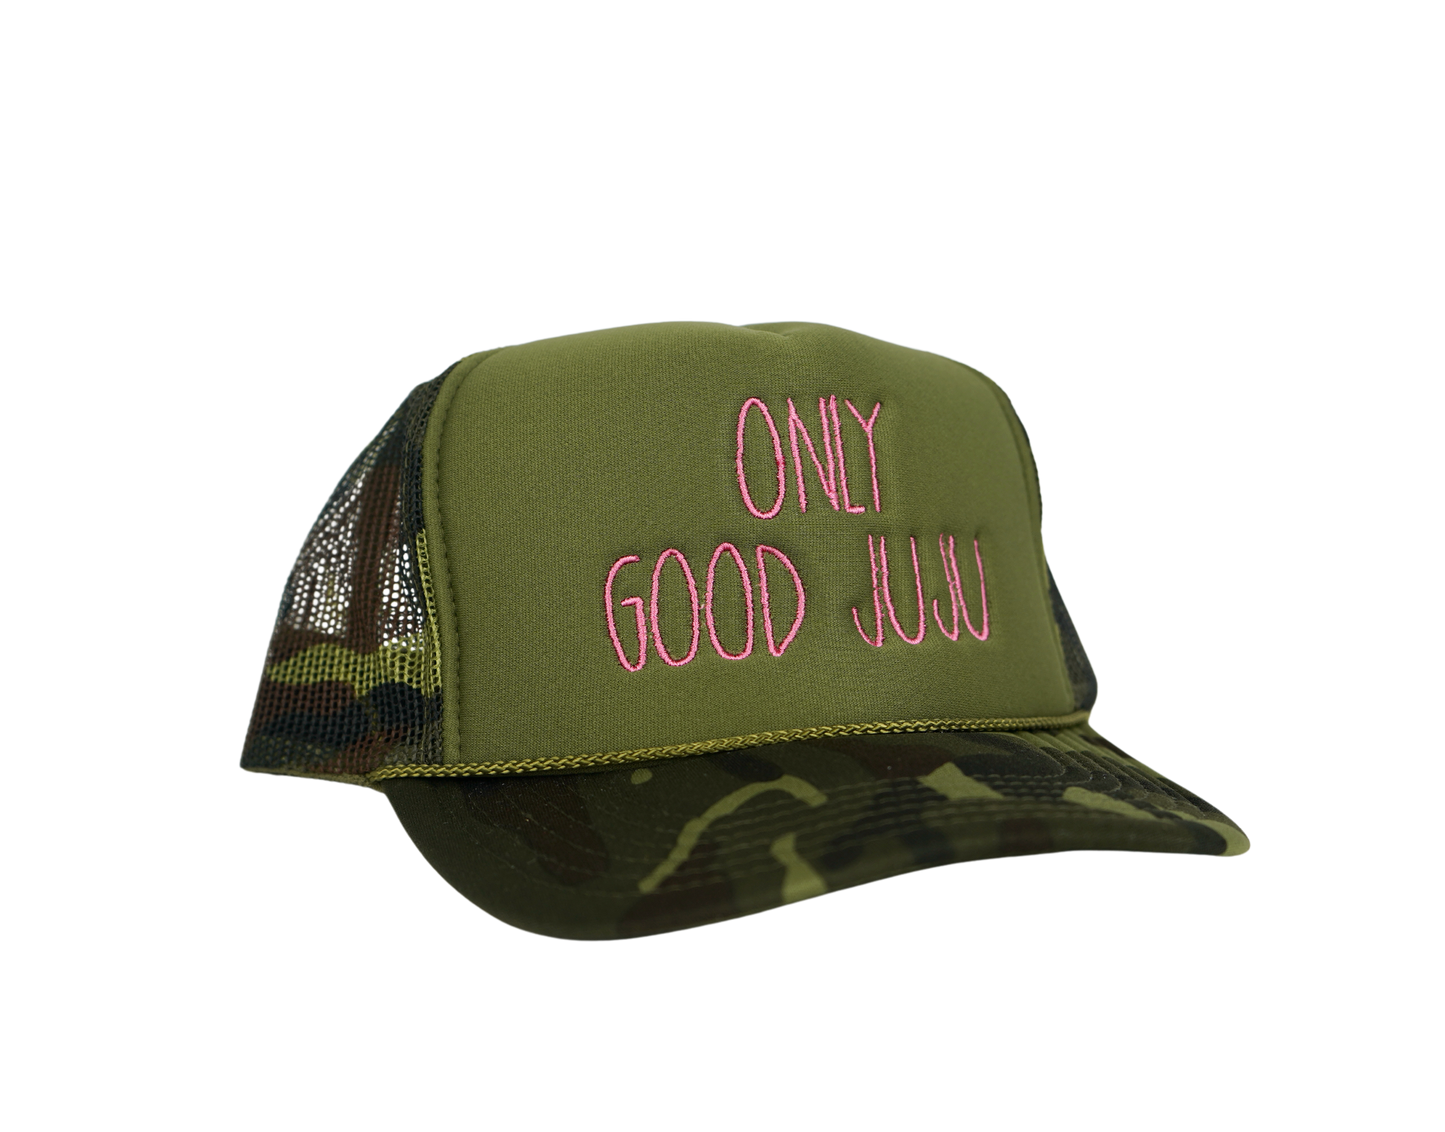 Only Good JuJu Embroidered Trucker Hat